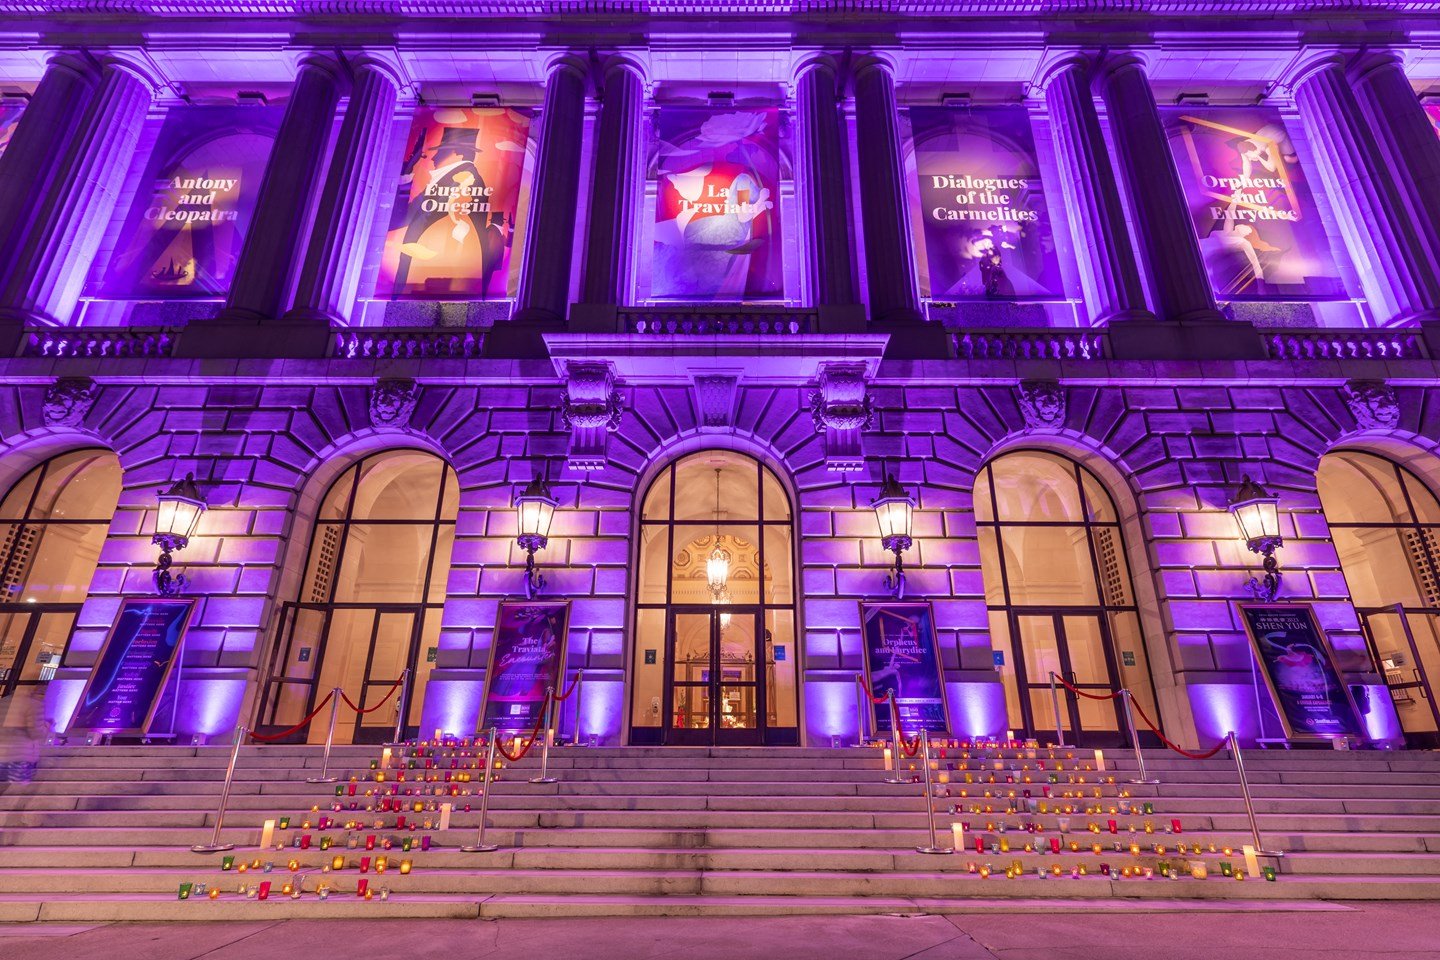 War Memorial Opera House lit up in purple with candles on the steps